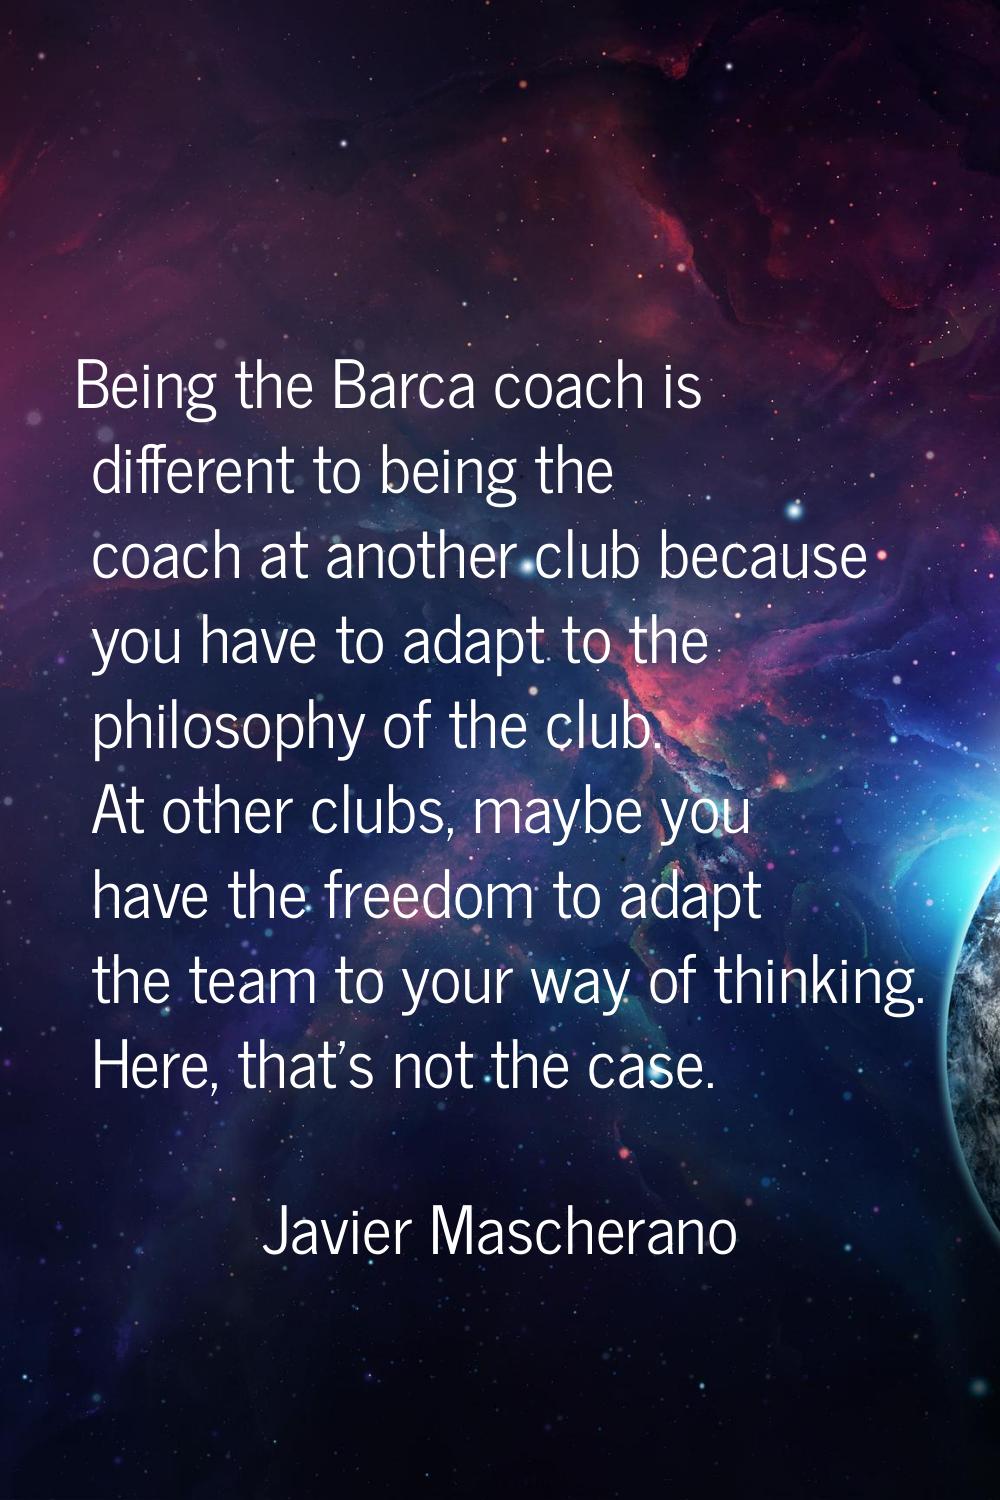 Being the Barca coach is different to being the coach at another club because you have to adapt to 